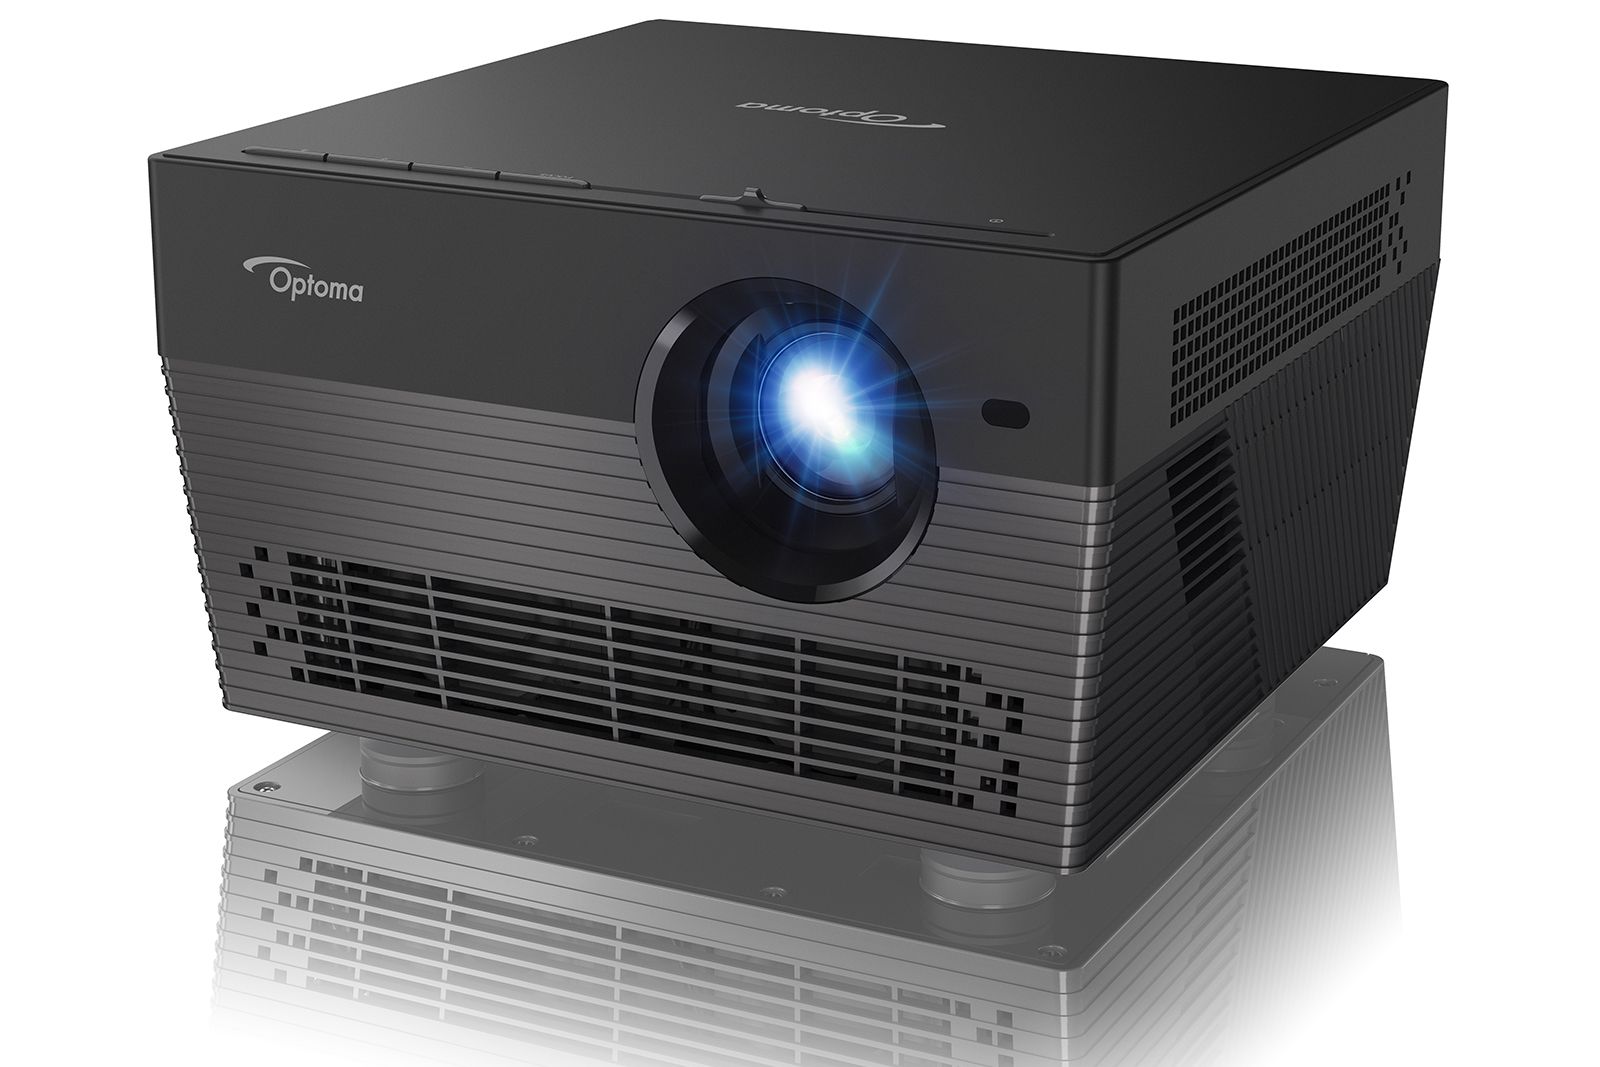 Optoma UHL55 is a 4K HDR projector with Alexa and speakers built in image 1